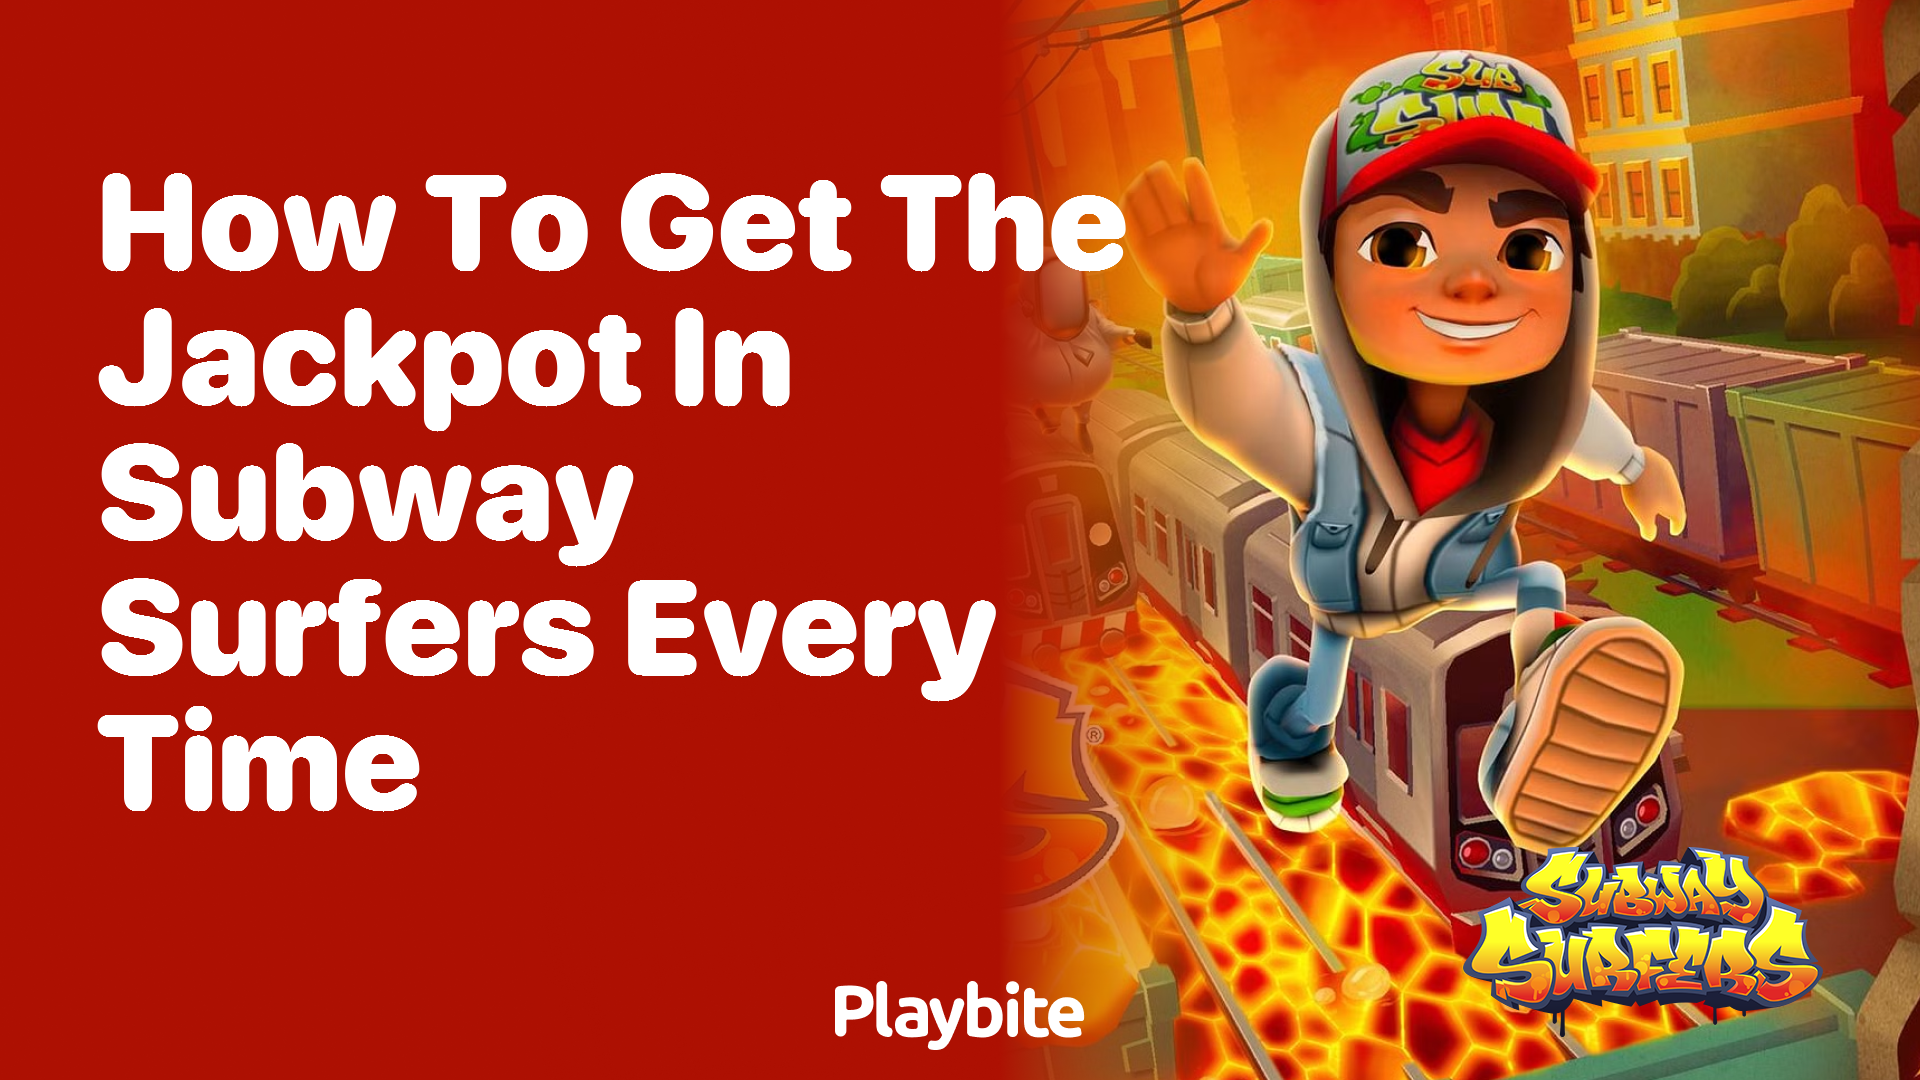 How to Get the Jackpot in Subway Surfers Every Time